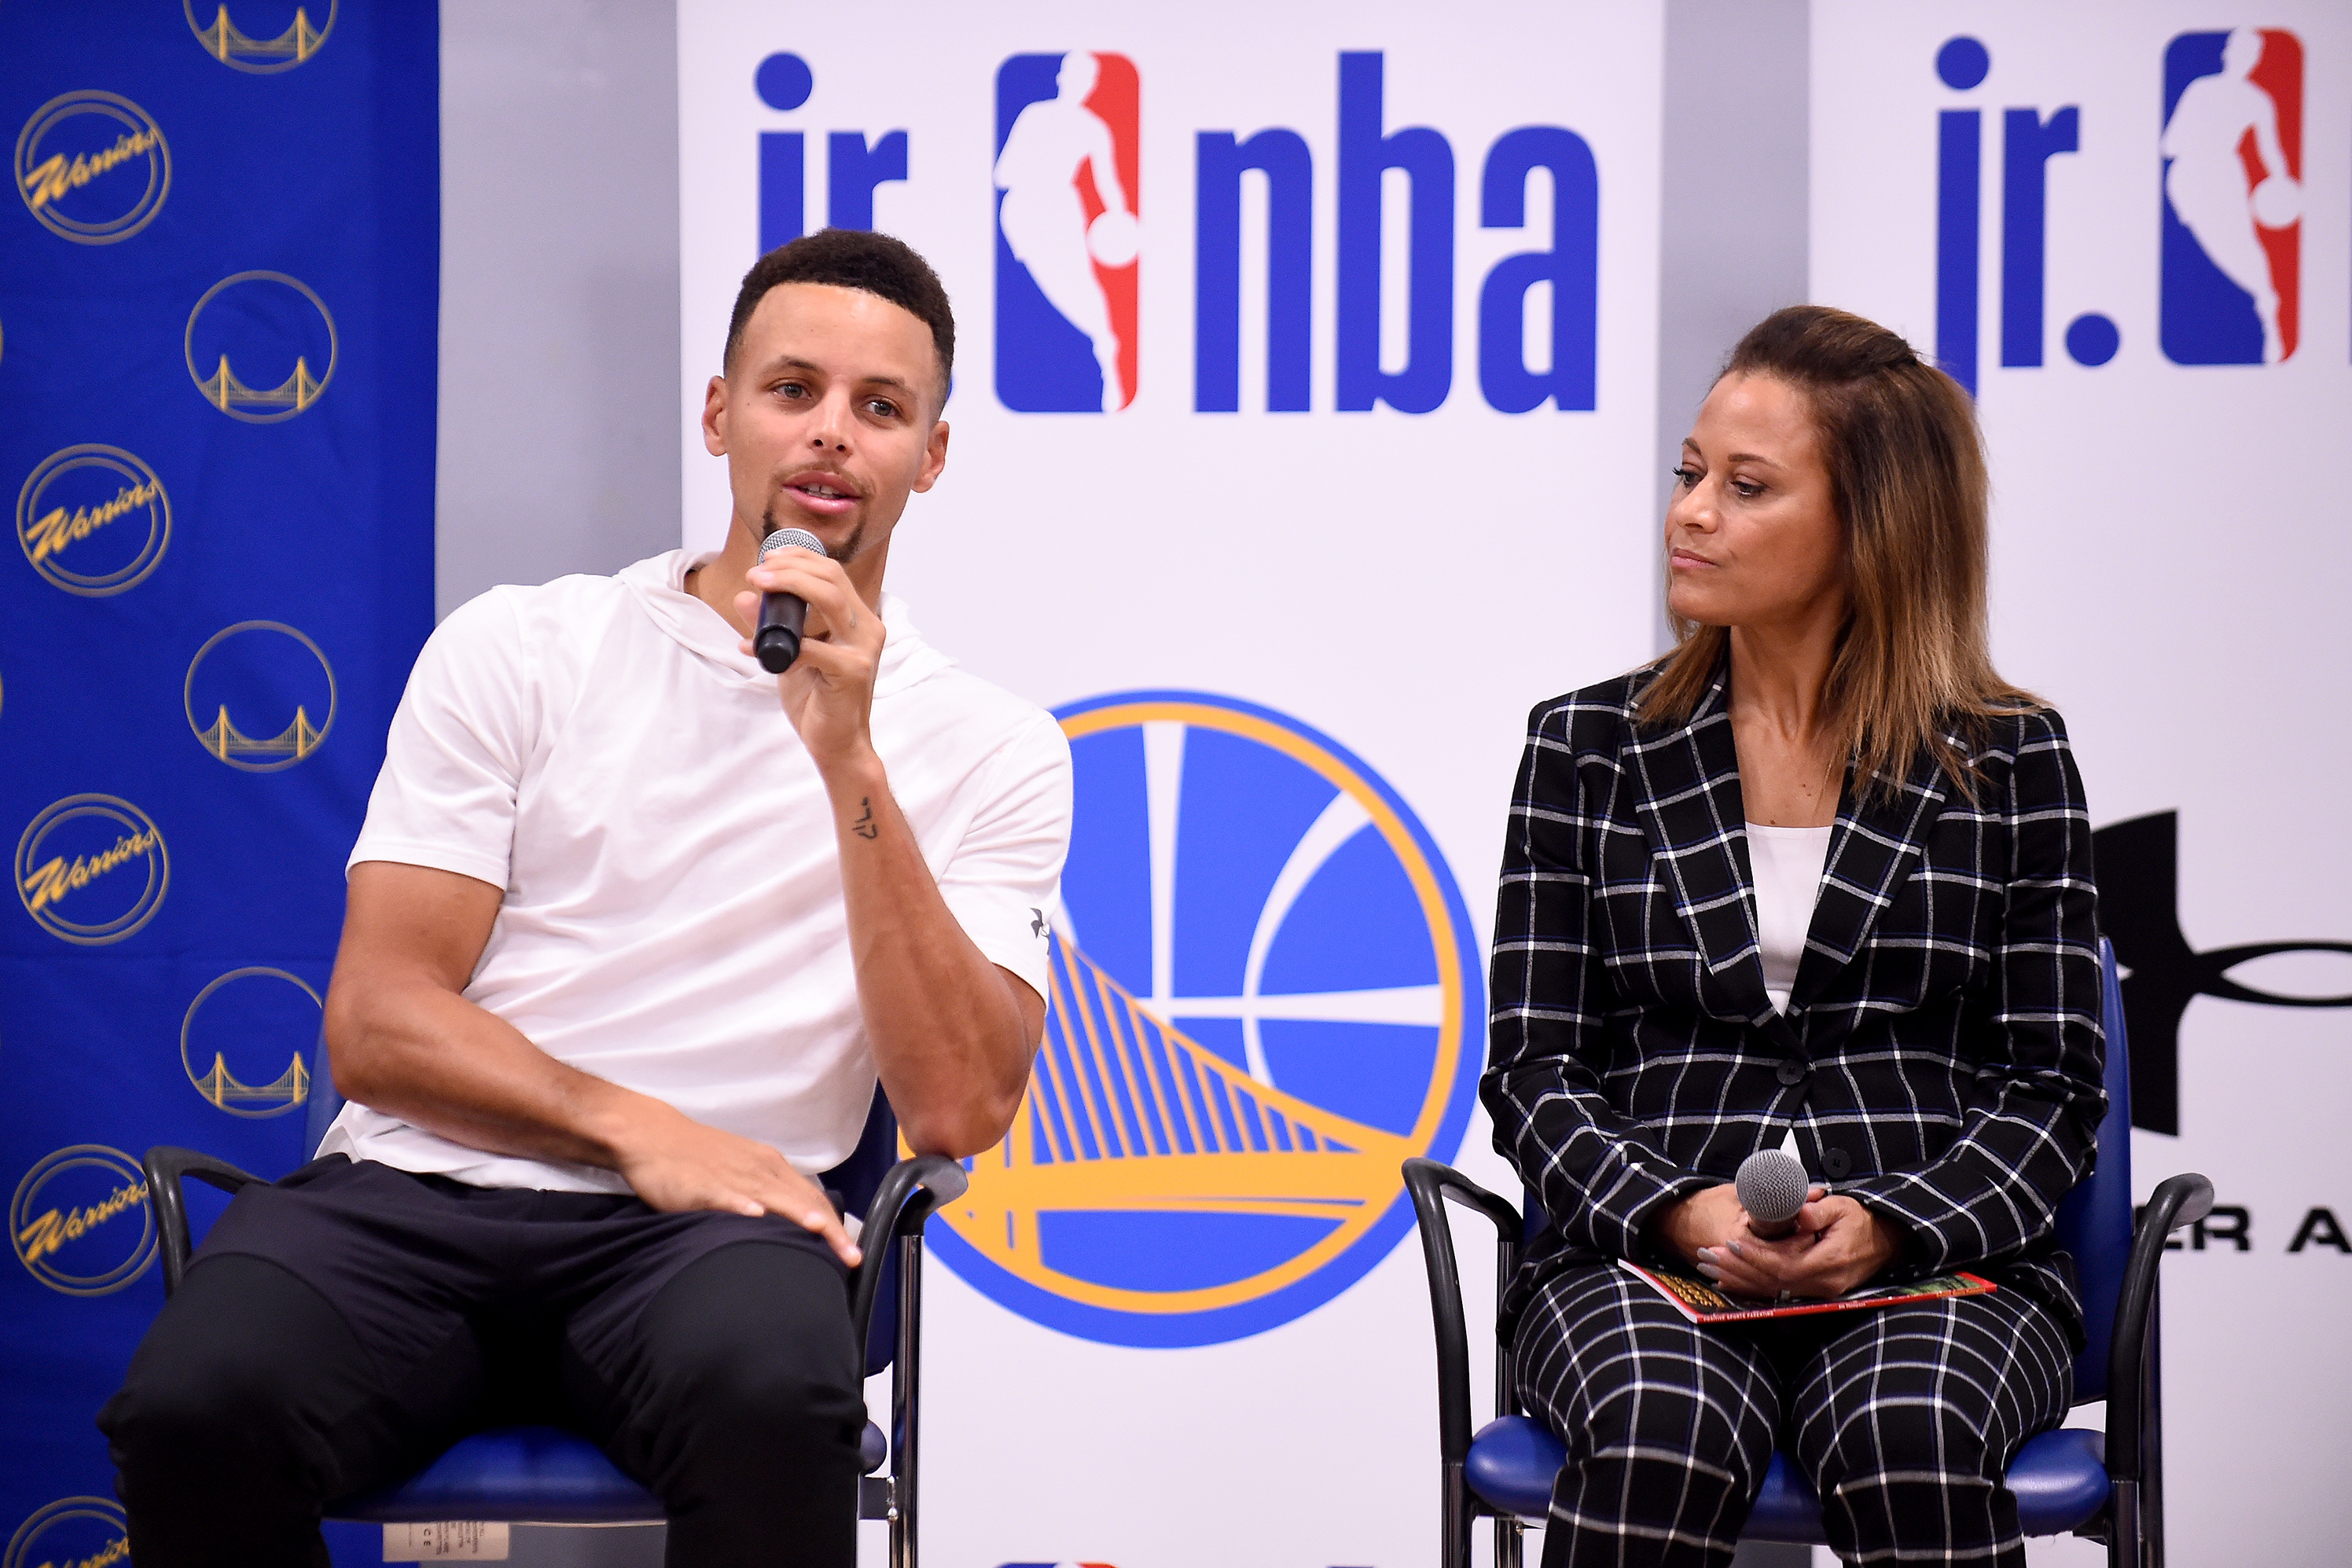 All About Steph Curry's Parents, Dell and Sonya Curry